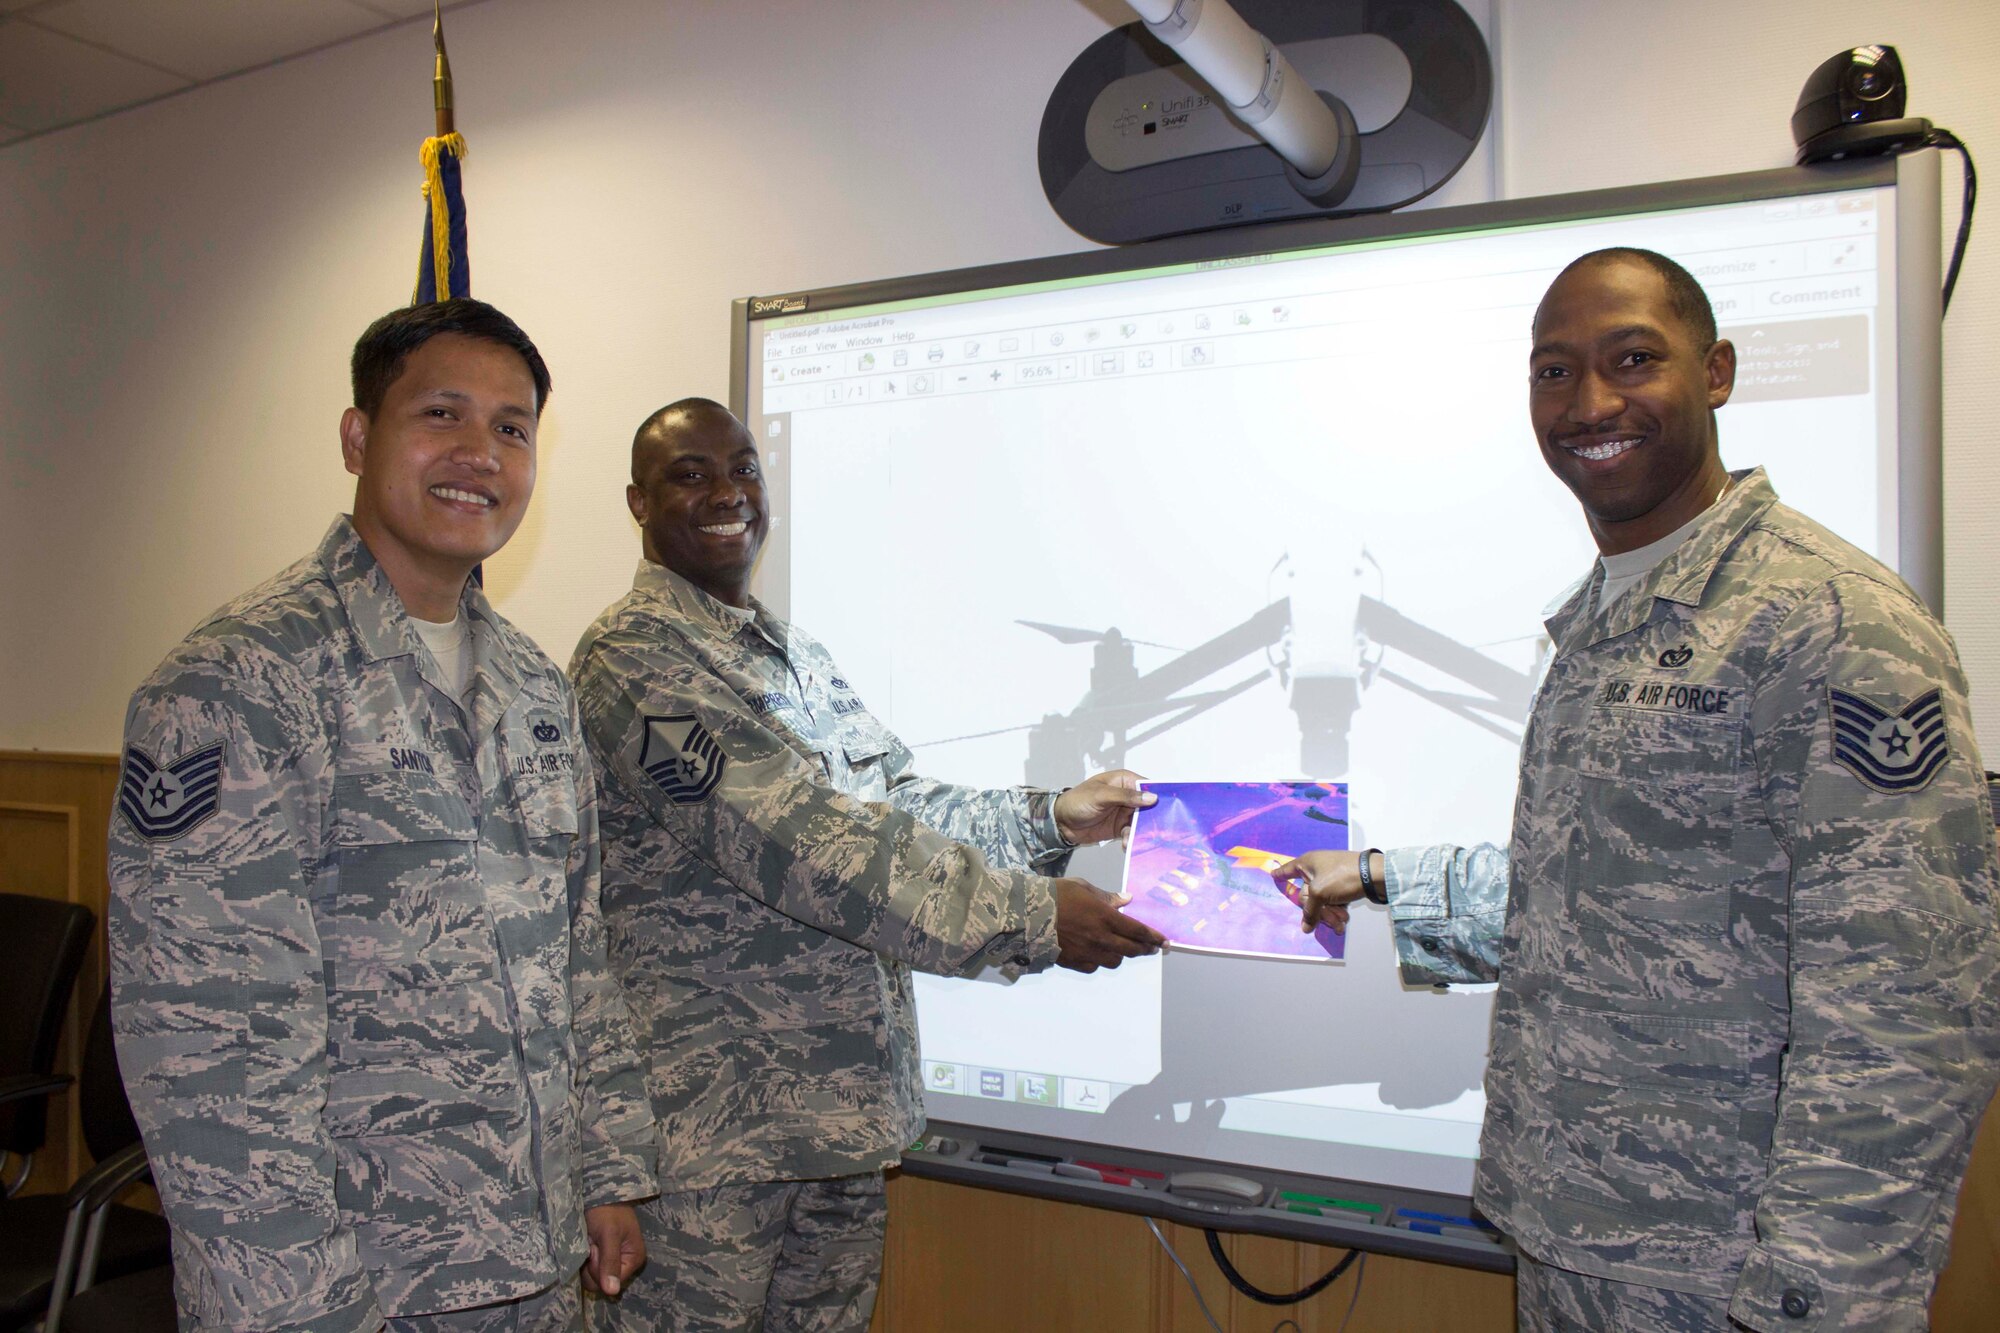 At Ramstein Air Base, Germany, (L to R) Tech. Sgt. Jeffrey Santos, Master Sgt. Sherman Armprester, and Tech. Sgt. Quentin Rawls, share an infrared photo taken with the facility assessment vehicle, or FAV, they designed for facility condition assessments. The FAVs would include thermal imaging, infrared, three battery packs, a global positioning system and a remote control. (U.S. Air Force Photo/Susan Lawson/Released)